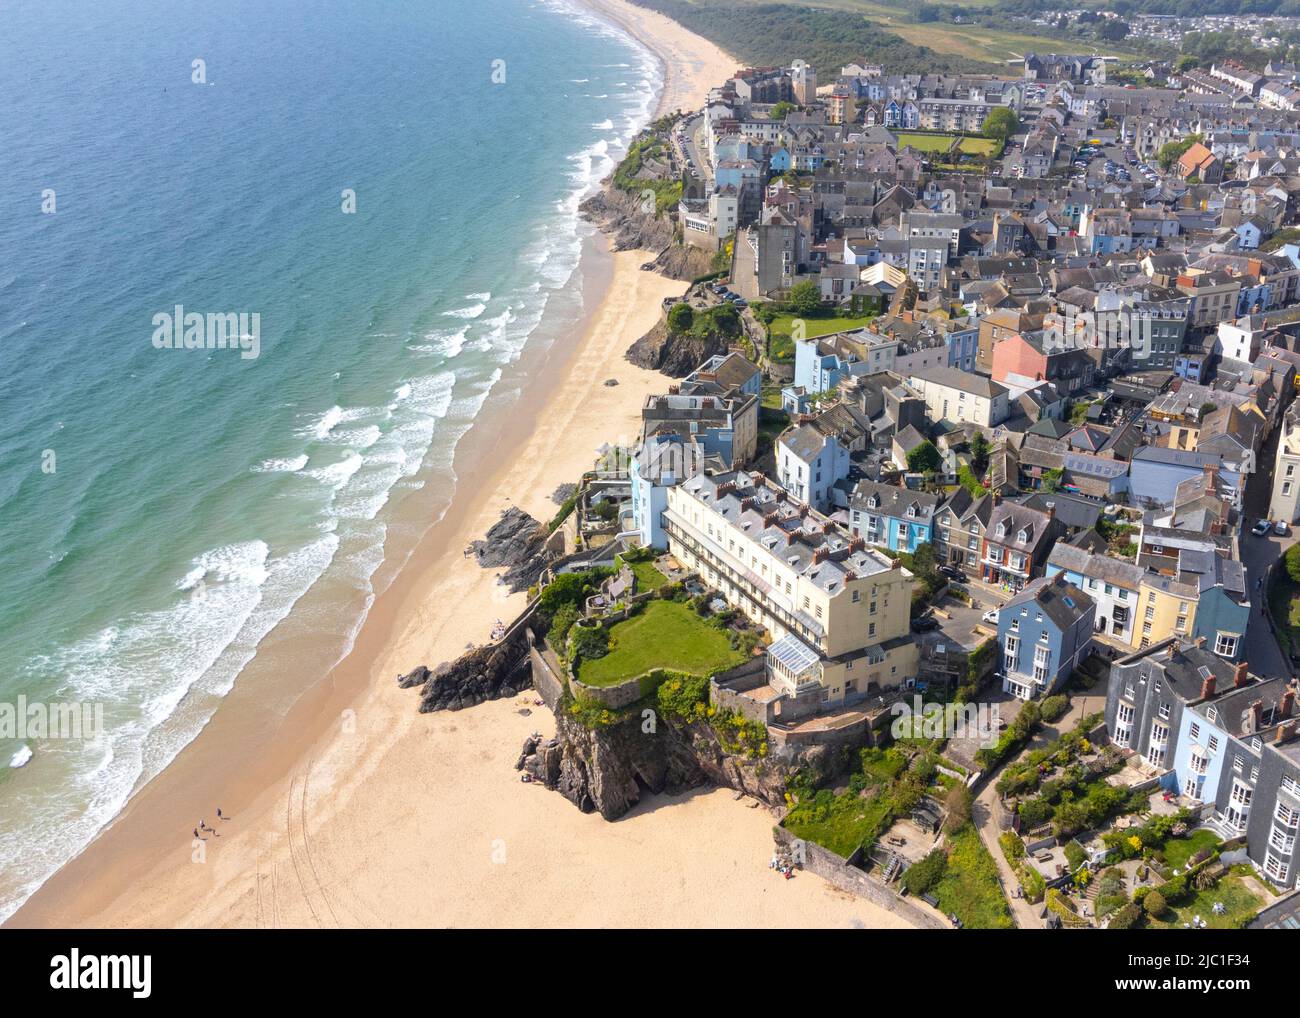 Overhead view of Tenby and the coastline - Pembrokeshire, Wales, UK Stock Photo